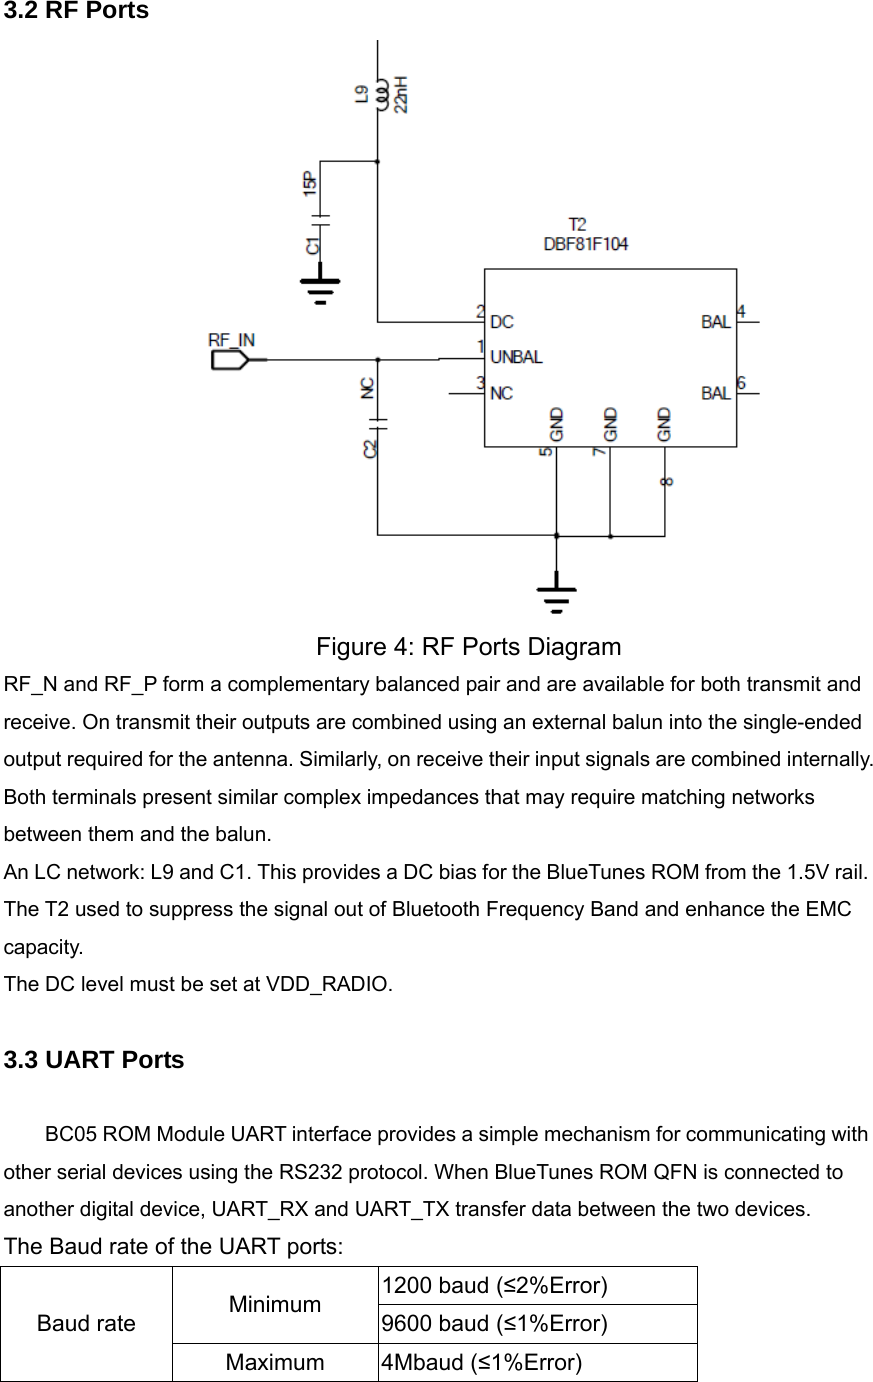  3.2 RF Ports                           Figure 4: RF Ports Diagram RF_N and RF_P form a complementary balanced pair and are available for both transmit and receive. On transmit their outputs are combined using an external balun into the single-ended output required for the antenna. Similarly, on receive their input signals are combined internally. Both terminals present similar complex impedances that may require matching networks between them and the balun. An LC network: L9 and C1. This provides a DC bias for the BlueTunes ROM from the 1.5V rail. The T2 used to suppress the signal out of Bluetooth Frequency Band and enhance the EMC capacity. The DC level must be set at VDD_RADIO.  3.3 UART Ports  BC05 ROM Module UART interface provides a simple mechanism for communicating with other serial devices using the RS232 protocol. When BlueTunes ROM QFN is connected to another digital device, UART_RX and UART_TX transfer data between the two devices. The Baud rate of the UART ports: 1200 baud (≤2%Error) Minimum  9600 baud (≤1%Error) Baud rate Maximum 4Mbaud (≤1%Error)  